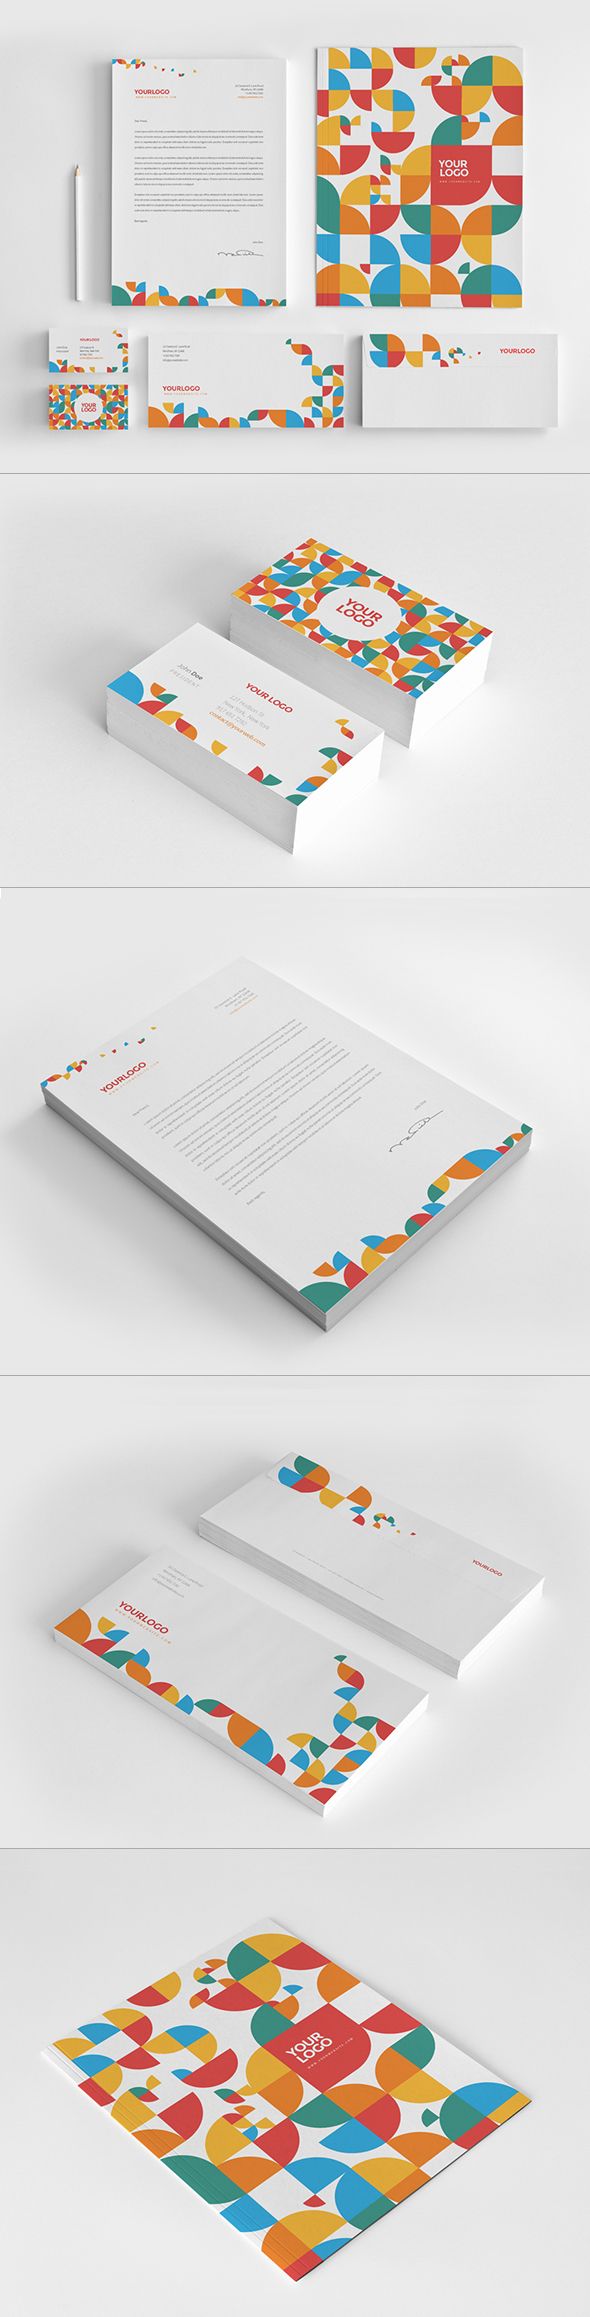 Colorful Circle Pattern Stationery by Abra Design, via Behance